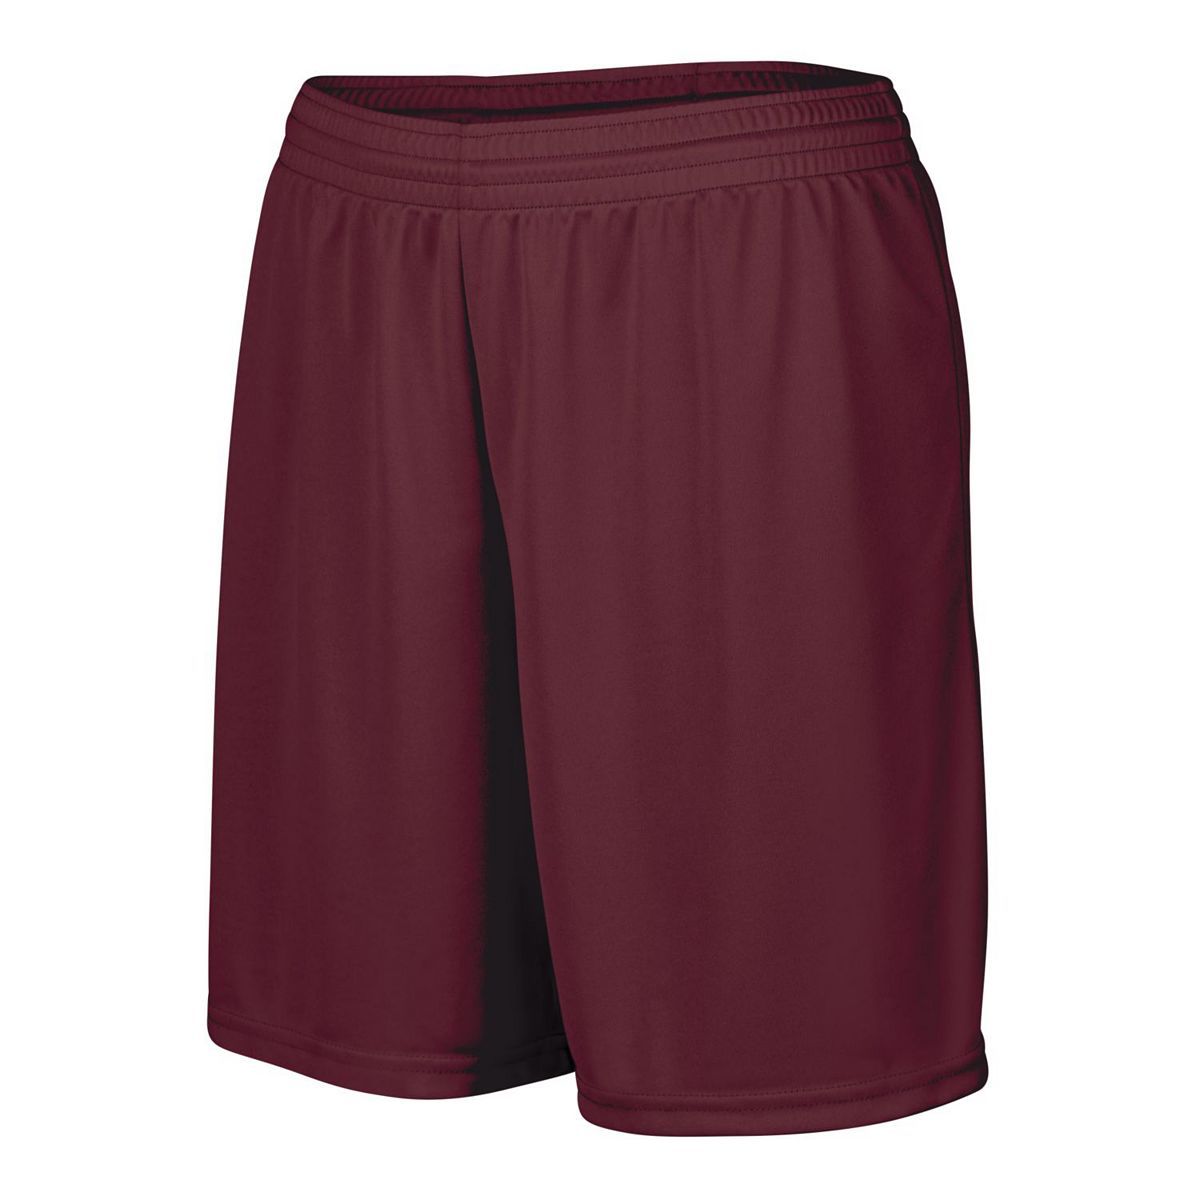 Augusta Sportswear Girls Octane Shorts in Maroon  -Part of the Girls, Augusta-Products, Girls-Shorts product lines at KanaleyCreations.com